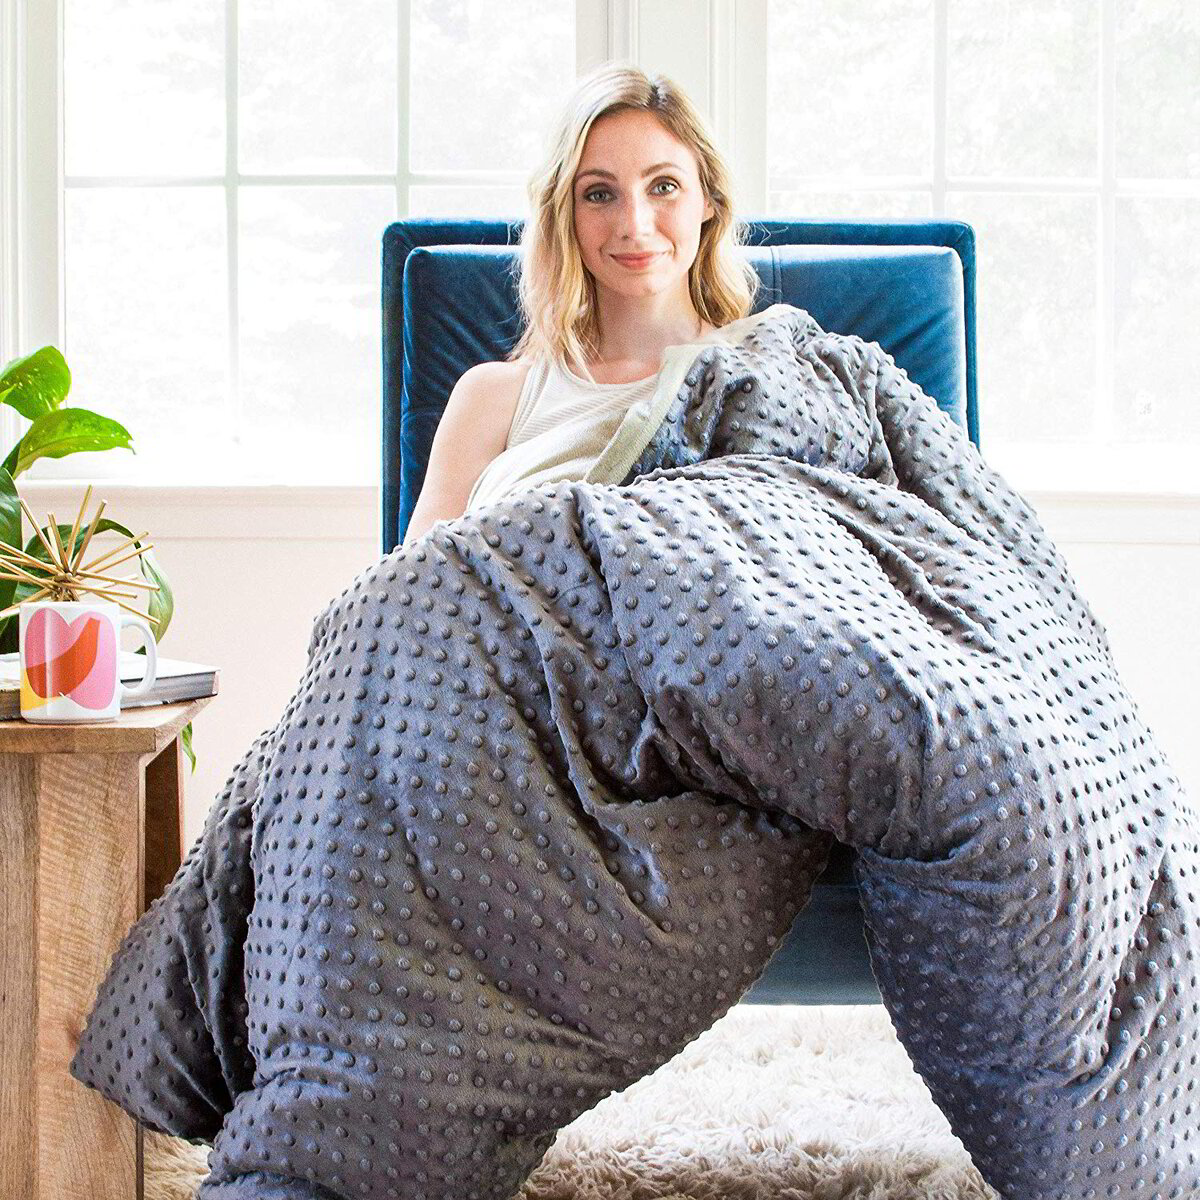 Weighted Blankets: Legit or Just a trend?